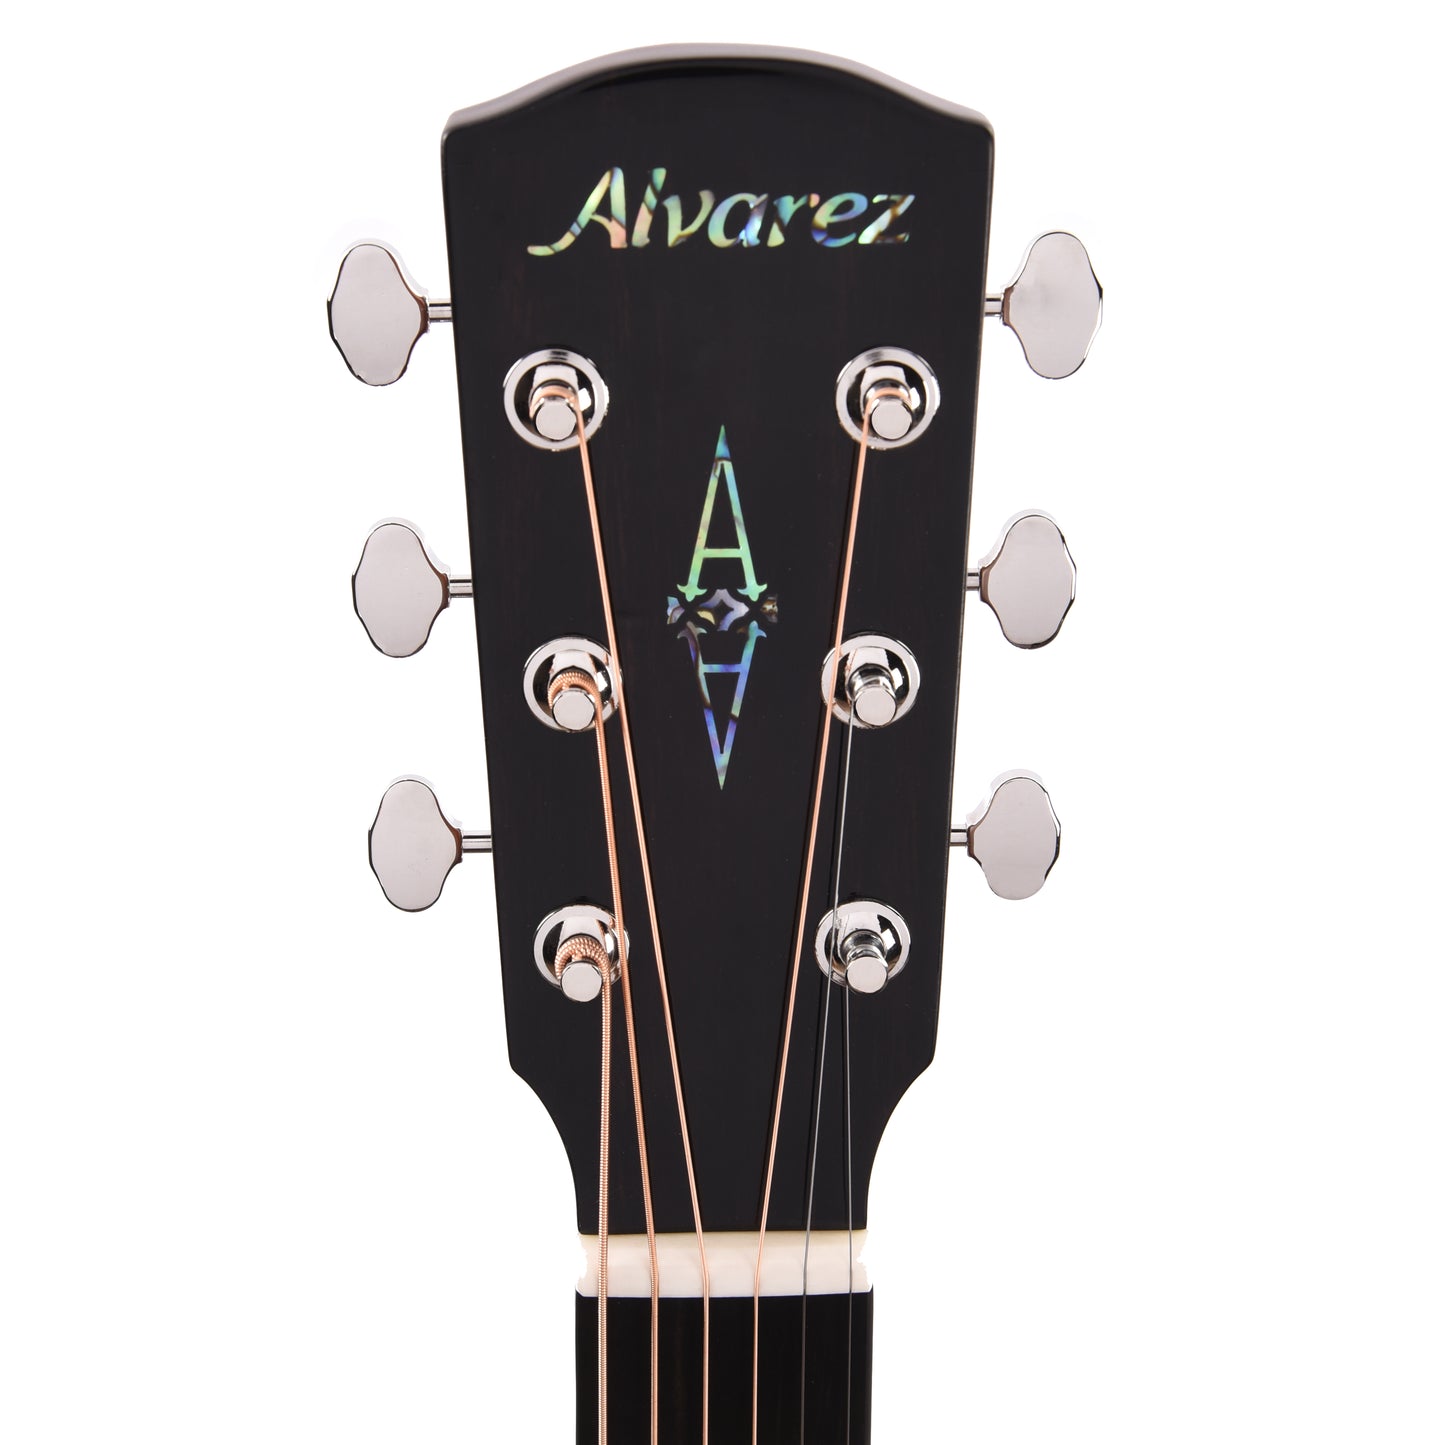 Alvarez LD70e Laureate Dreadnought AAAA Solid North American Sitka/Solid East Indian Rosewood Daybreak